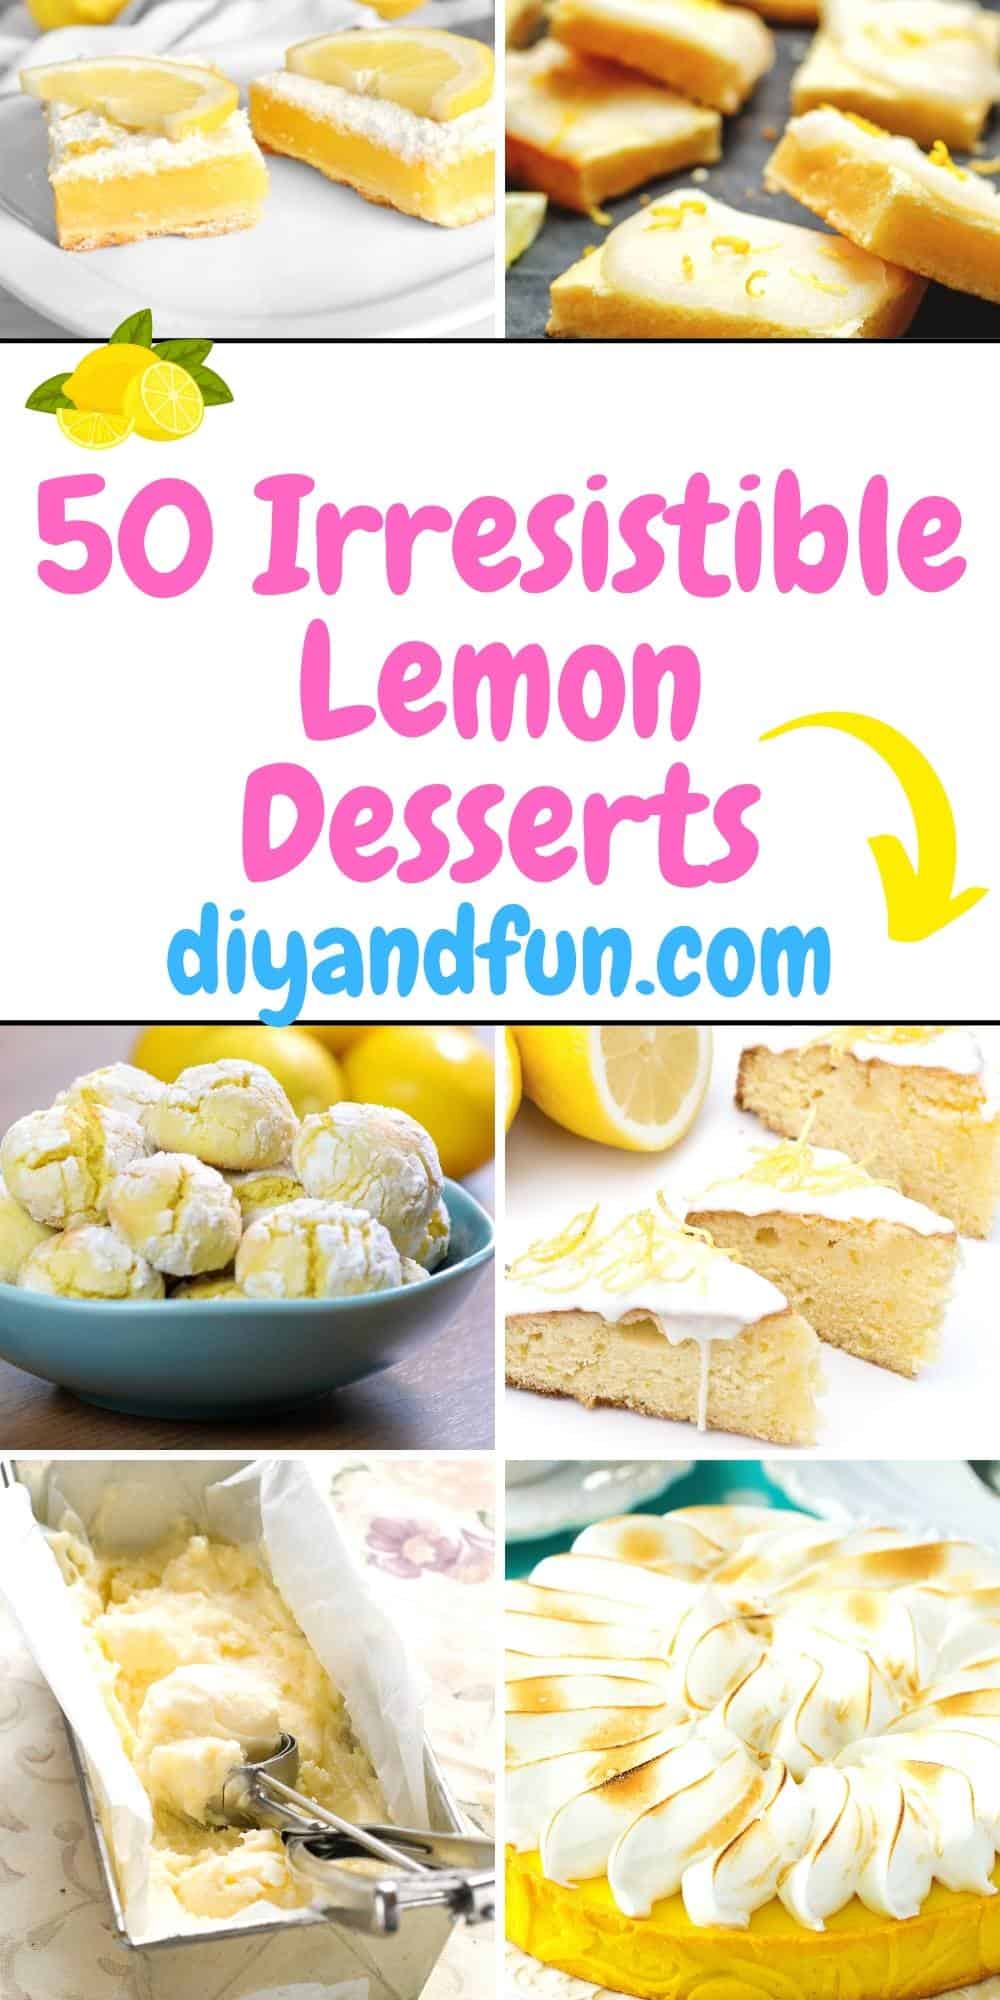 50 Irresistible Lemon Dessert Recipes, amazing and delicious sweet ideas that all have lemon as an ingredient. 